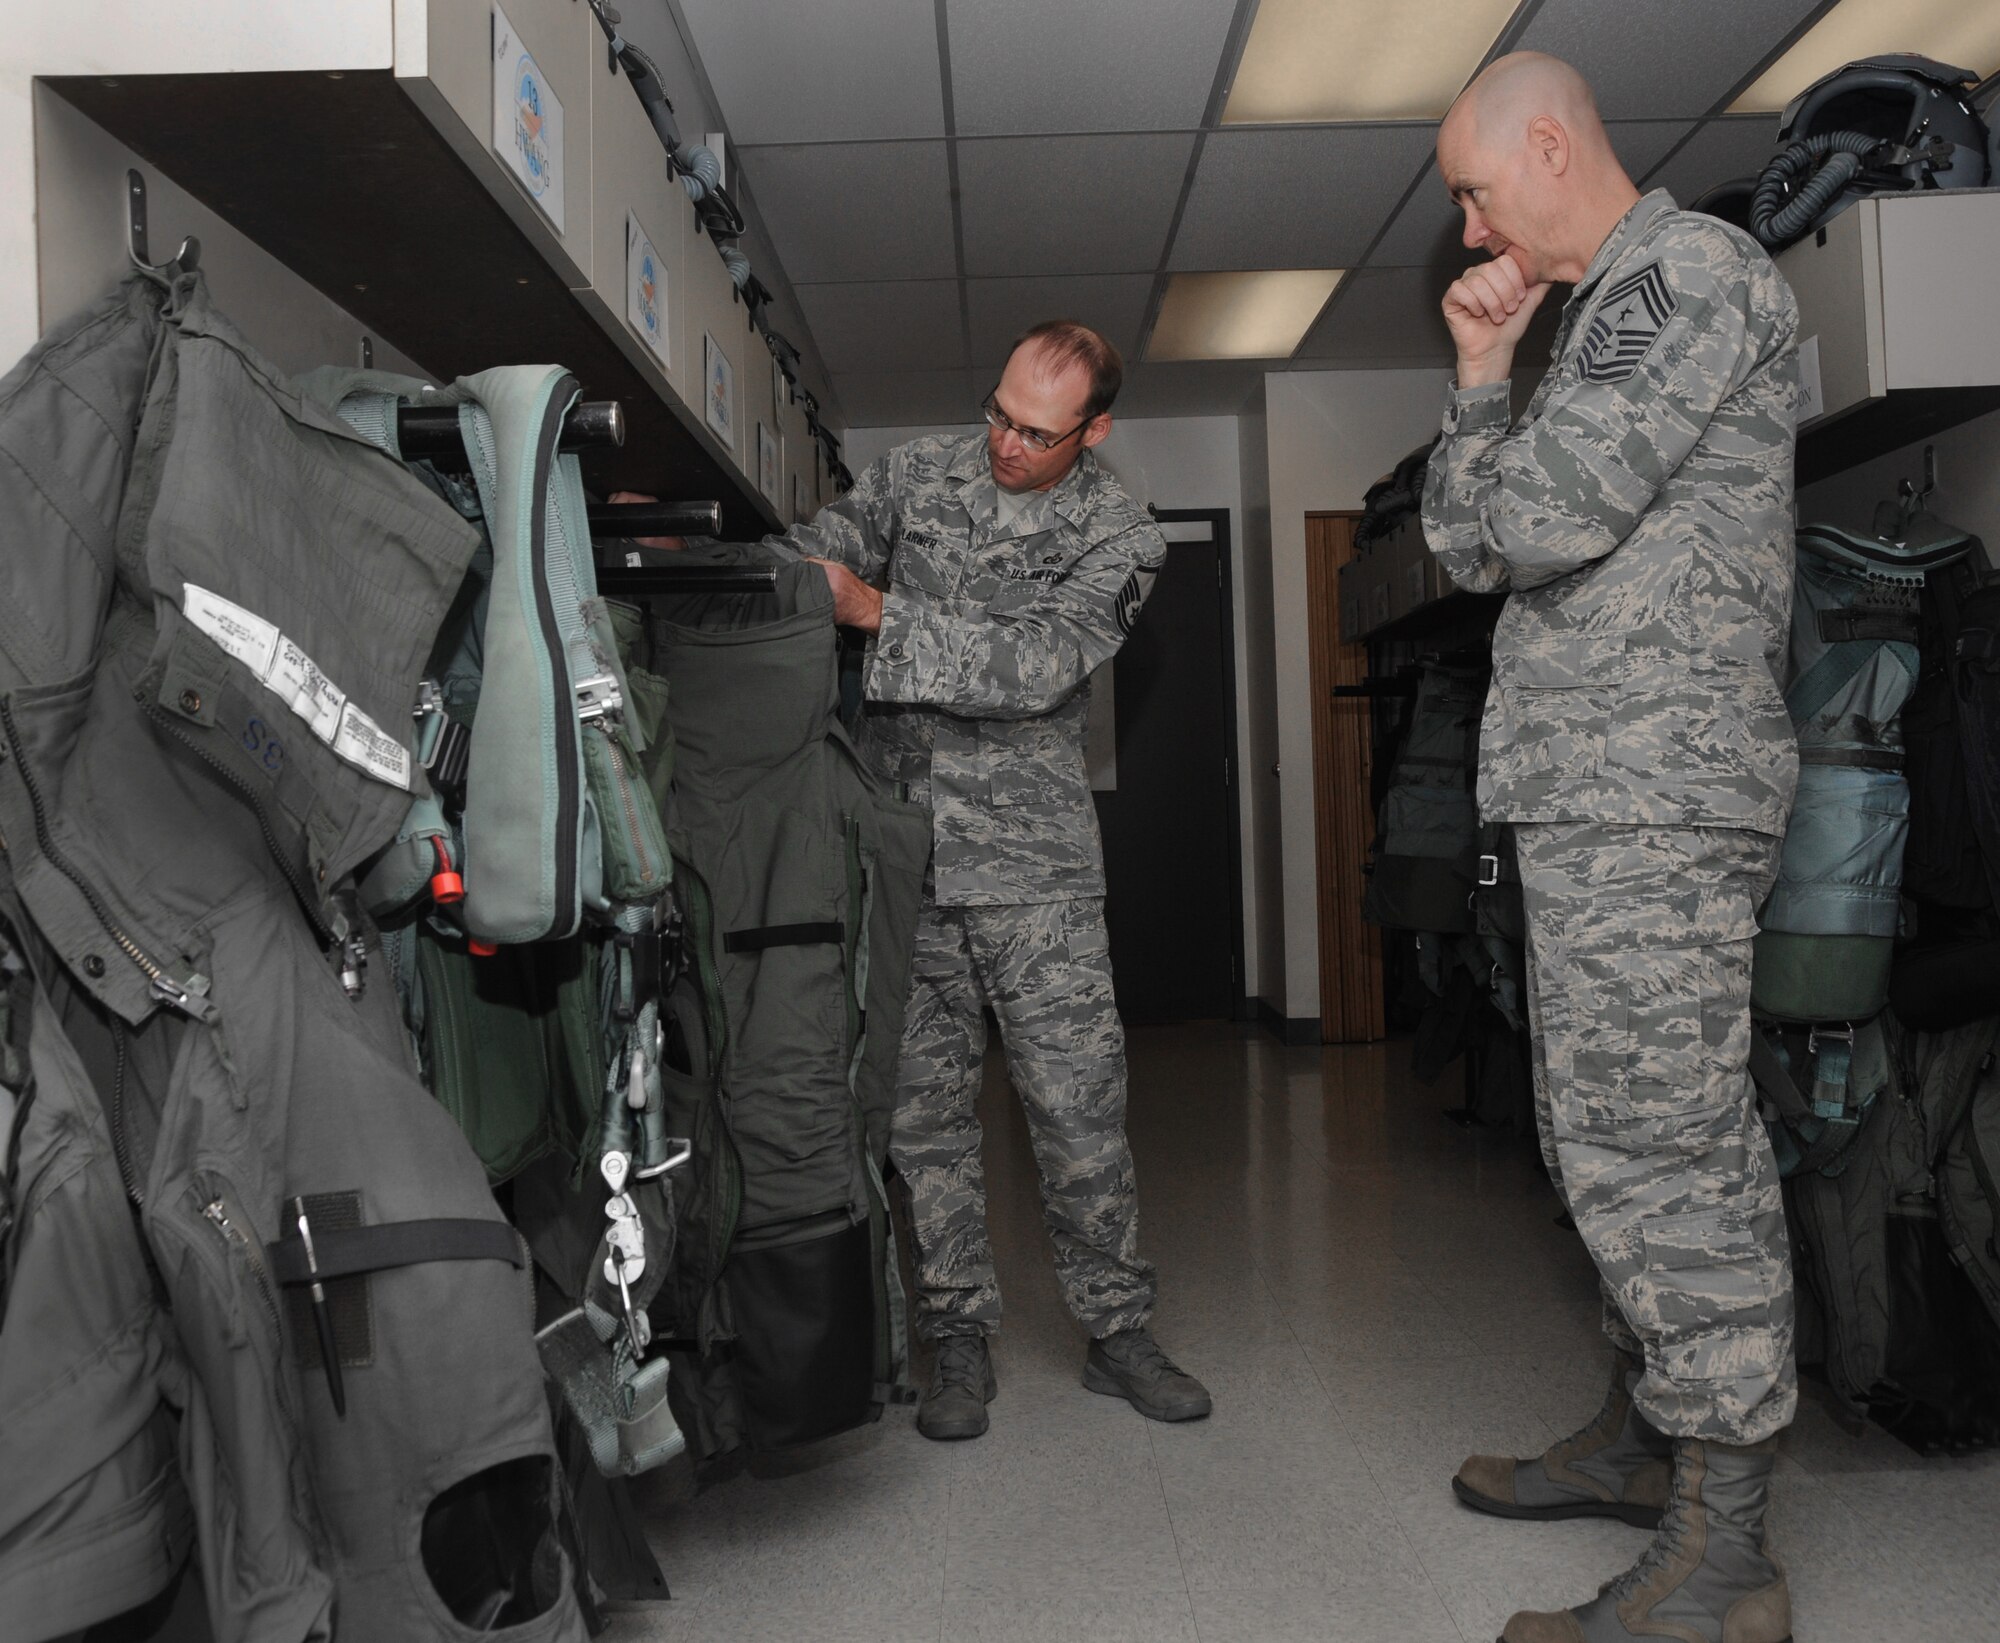 Ronald C. Anderson Jr., Command Chief Master Sgt., 1st Air Force, right, inspects new G-Suits with Master Sgt. Mike Larner, a flight equipment specialist, left, during his tour of the Portland Air National Guard Base, Ore., June 10, 2014. (Air National Guard photo by Tech. Sgt. John Hughel, 142nd Fighter Wing Public Affairs/Released)